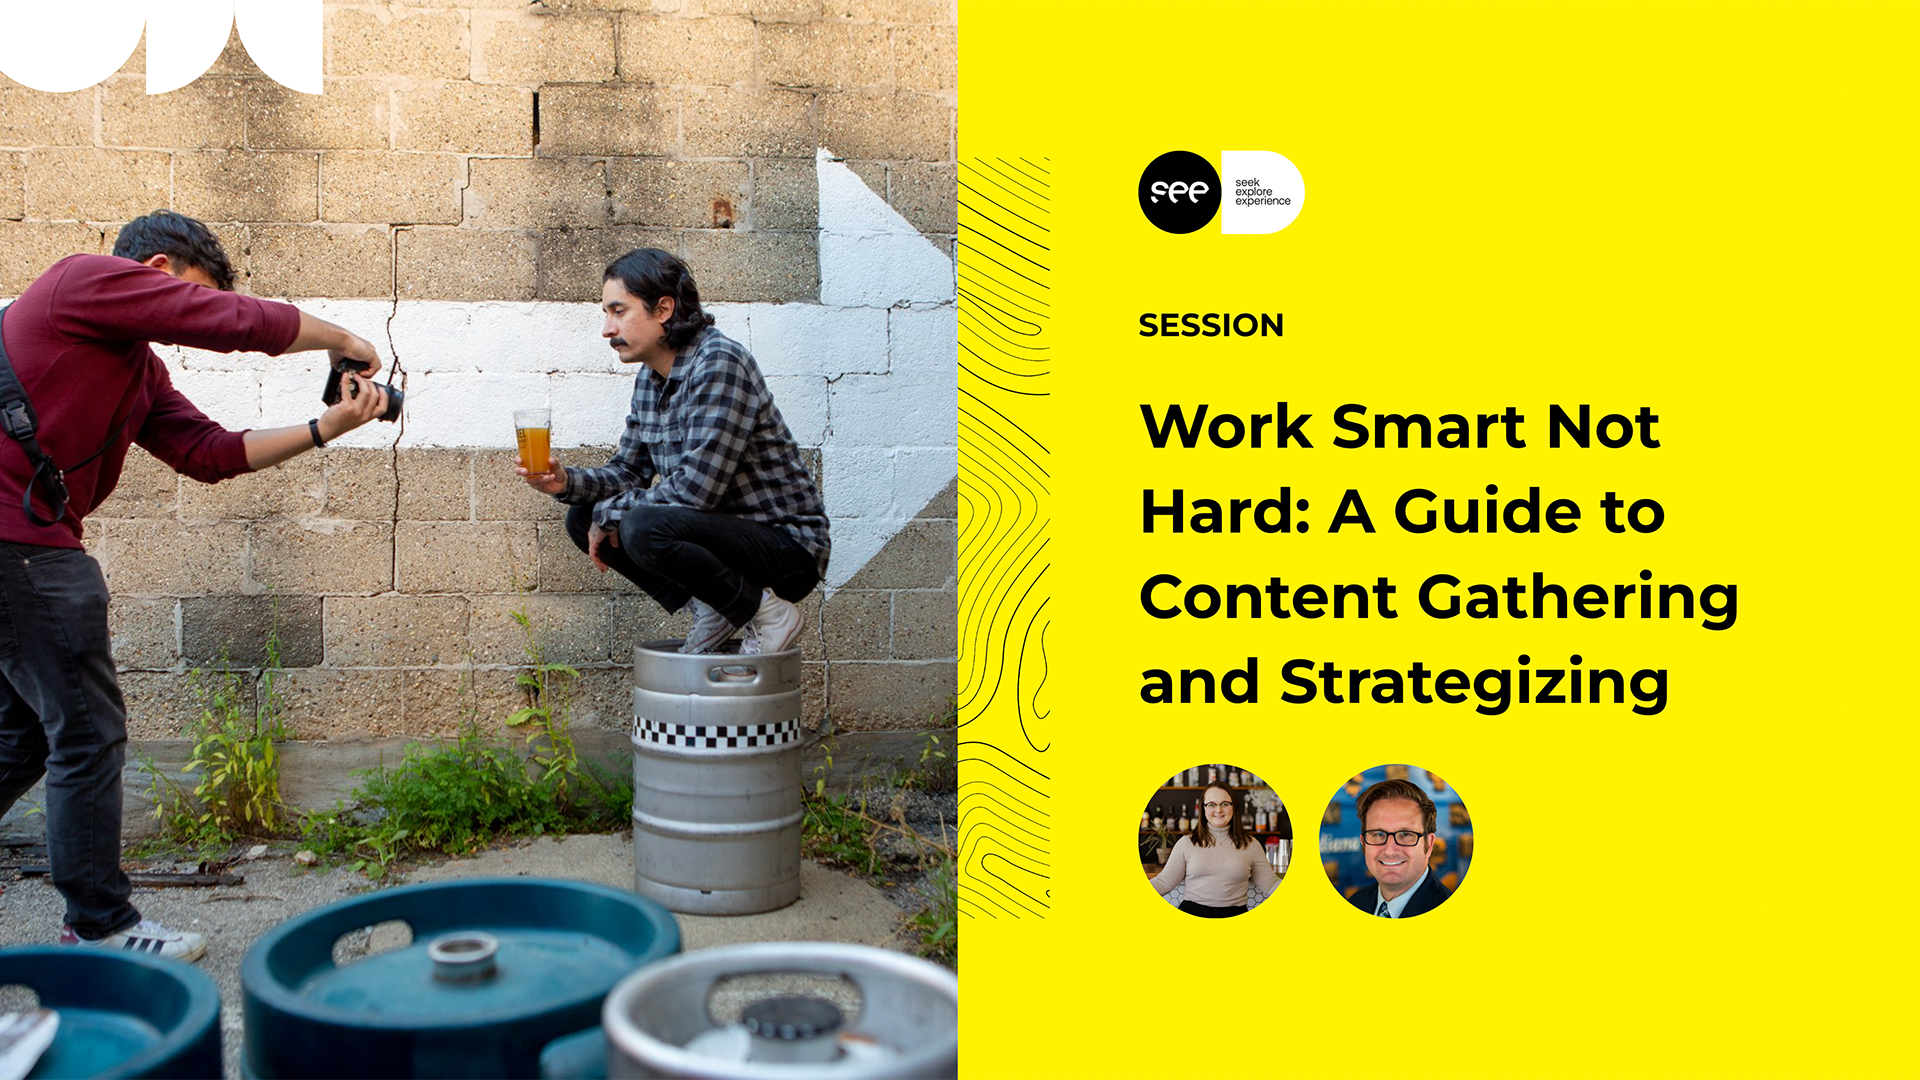 Work Smart Not Hard: A Guide to Content Gathering and Strategizing